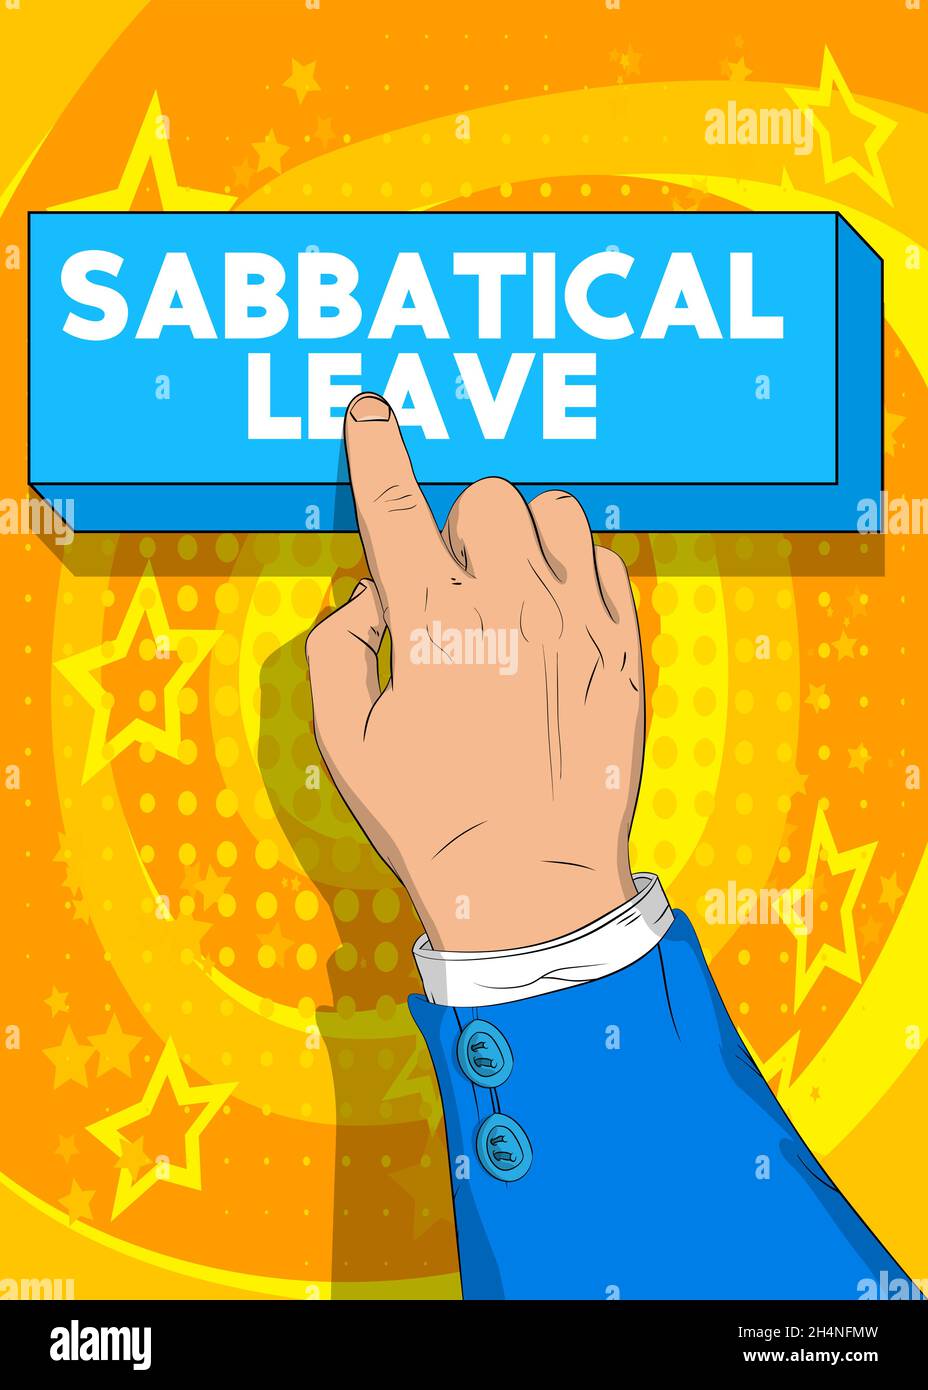 Businessman pushing Sabbatical leave button with his index finger. Comic book style illustration. Break from job stress concept. Stock Vector